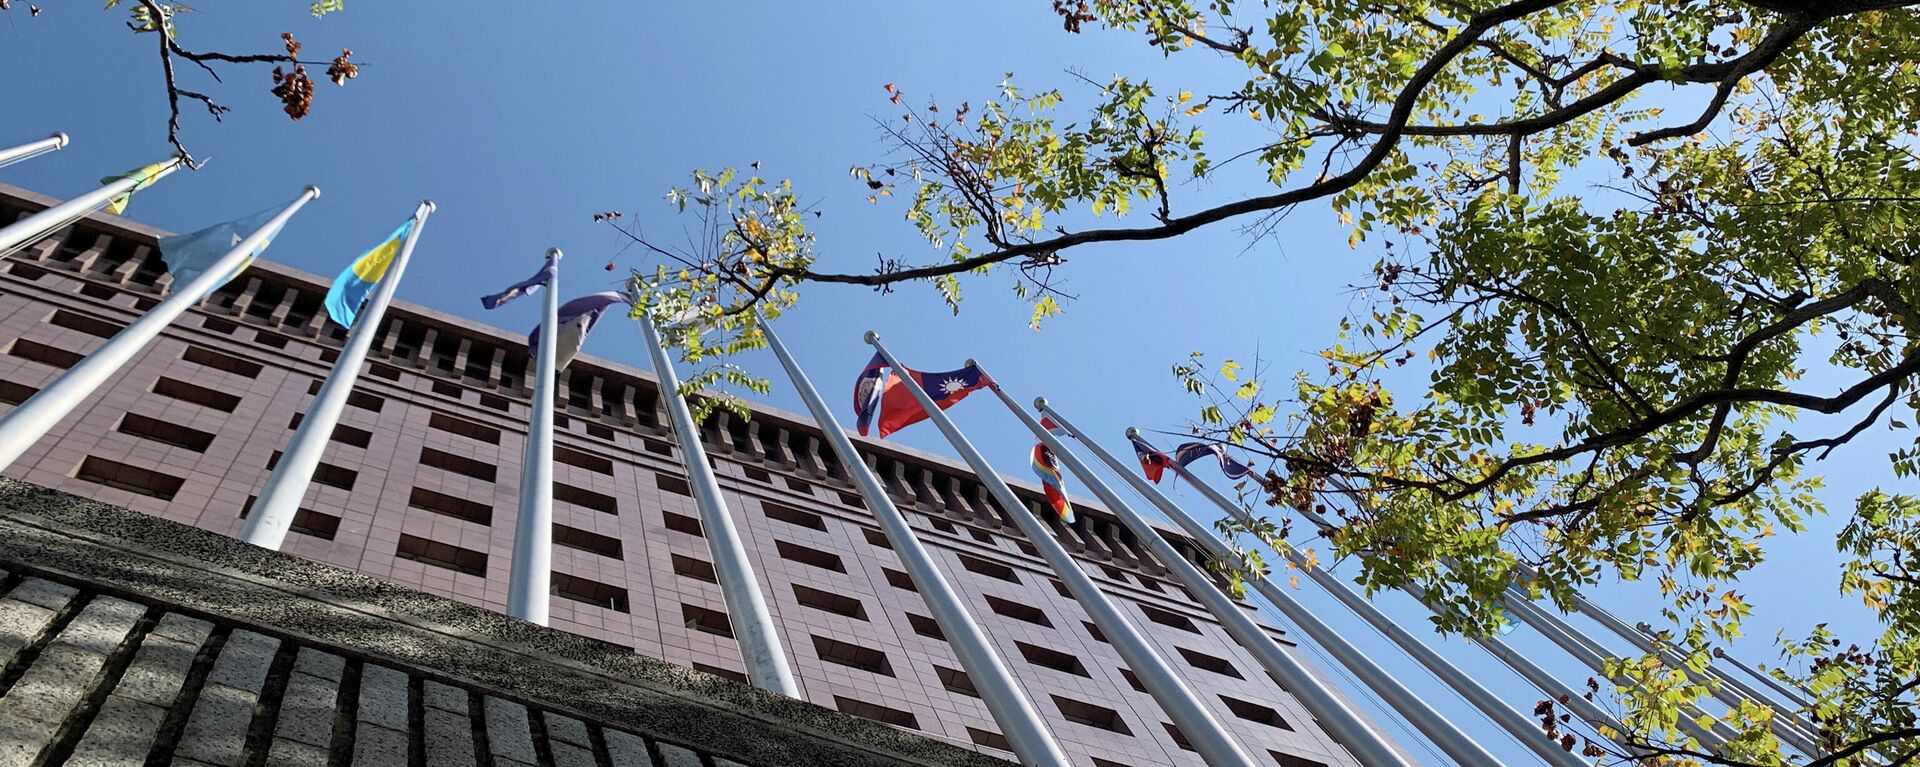 Flags of Taiwan and foreign countries flutter at the Diplomatic Quarter which houses the former Nicaraguan embassy and other foreign embassies, in Taipei, Taiwan December 10, 2021 - Sputnik International, 1920, 10.12.2021